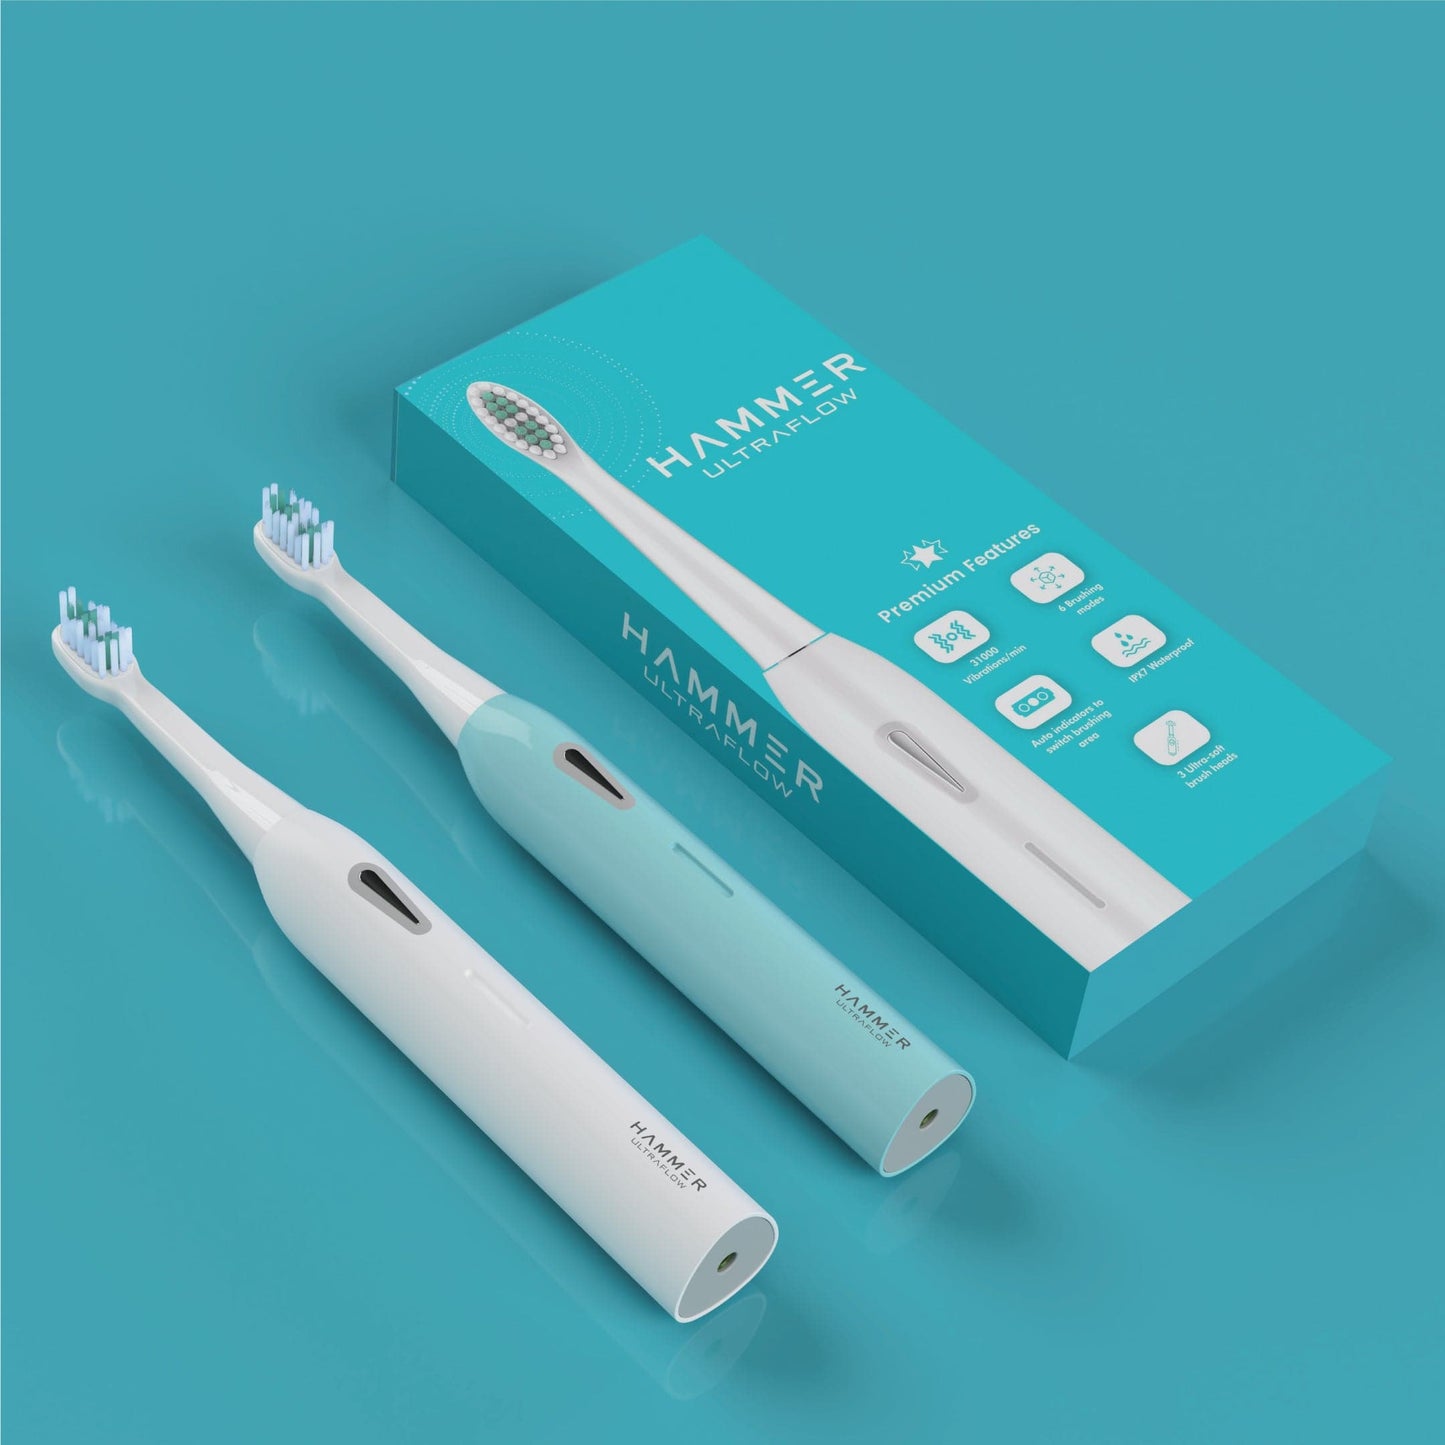 Hammer Ultra Flow Electric Toothbrush 31000 Strokes per Minute